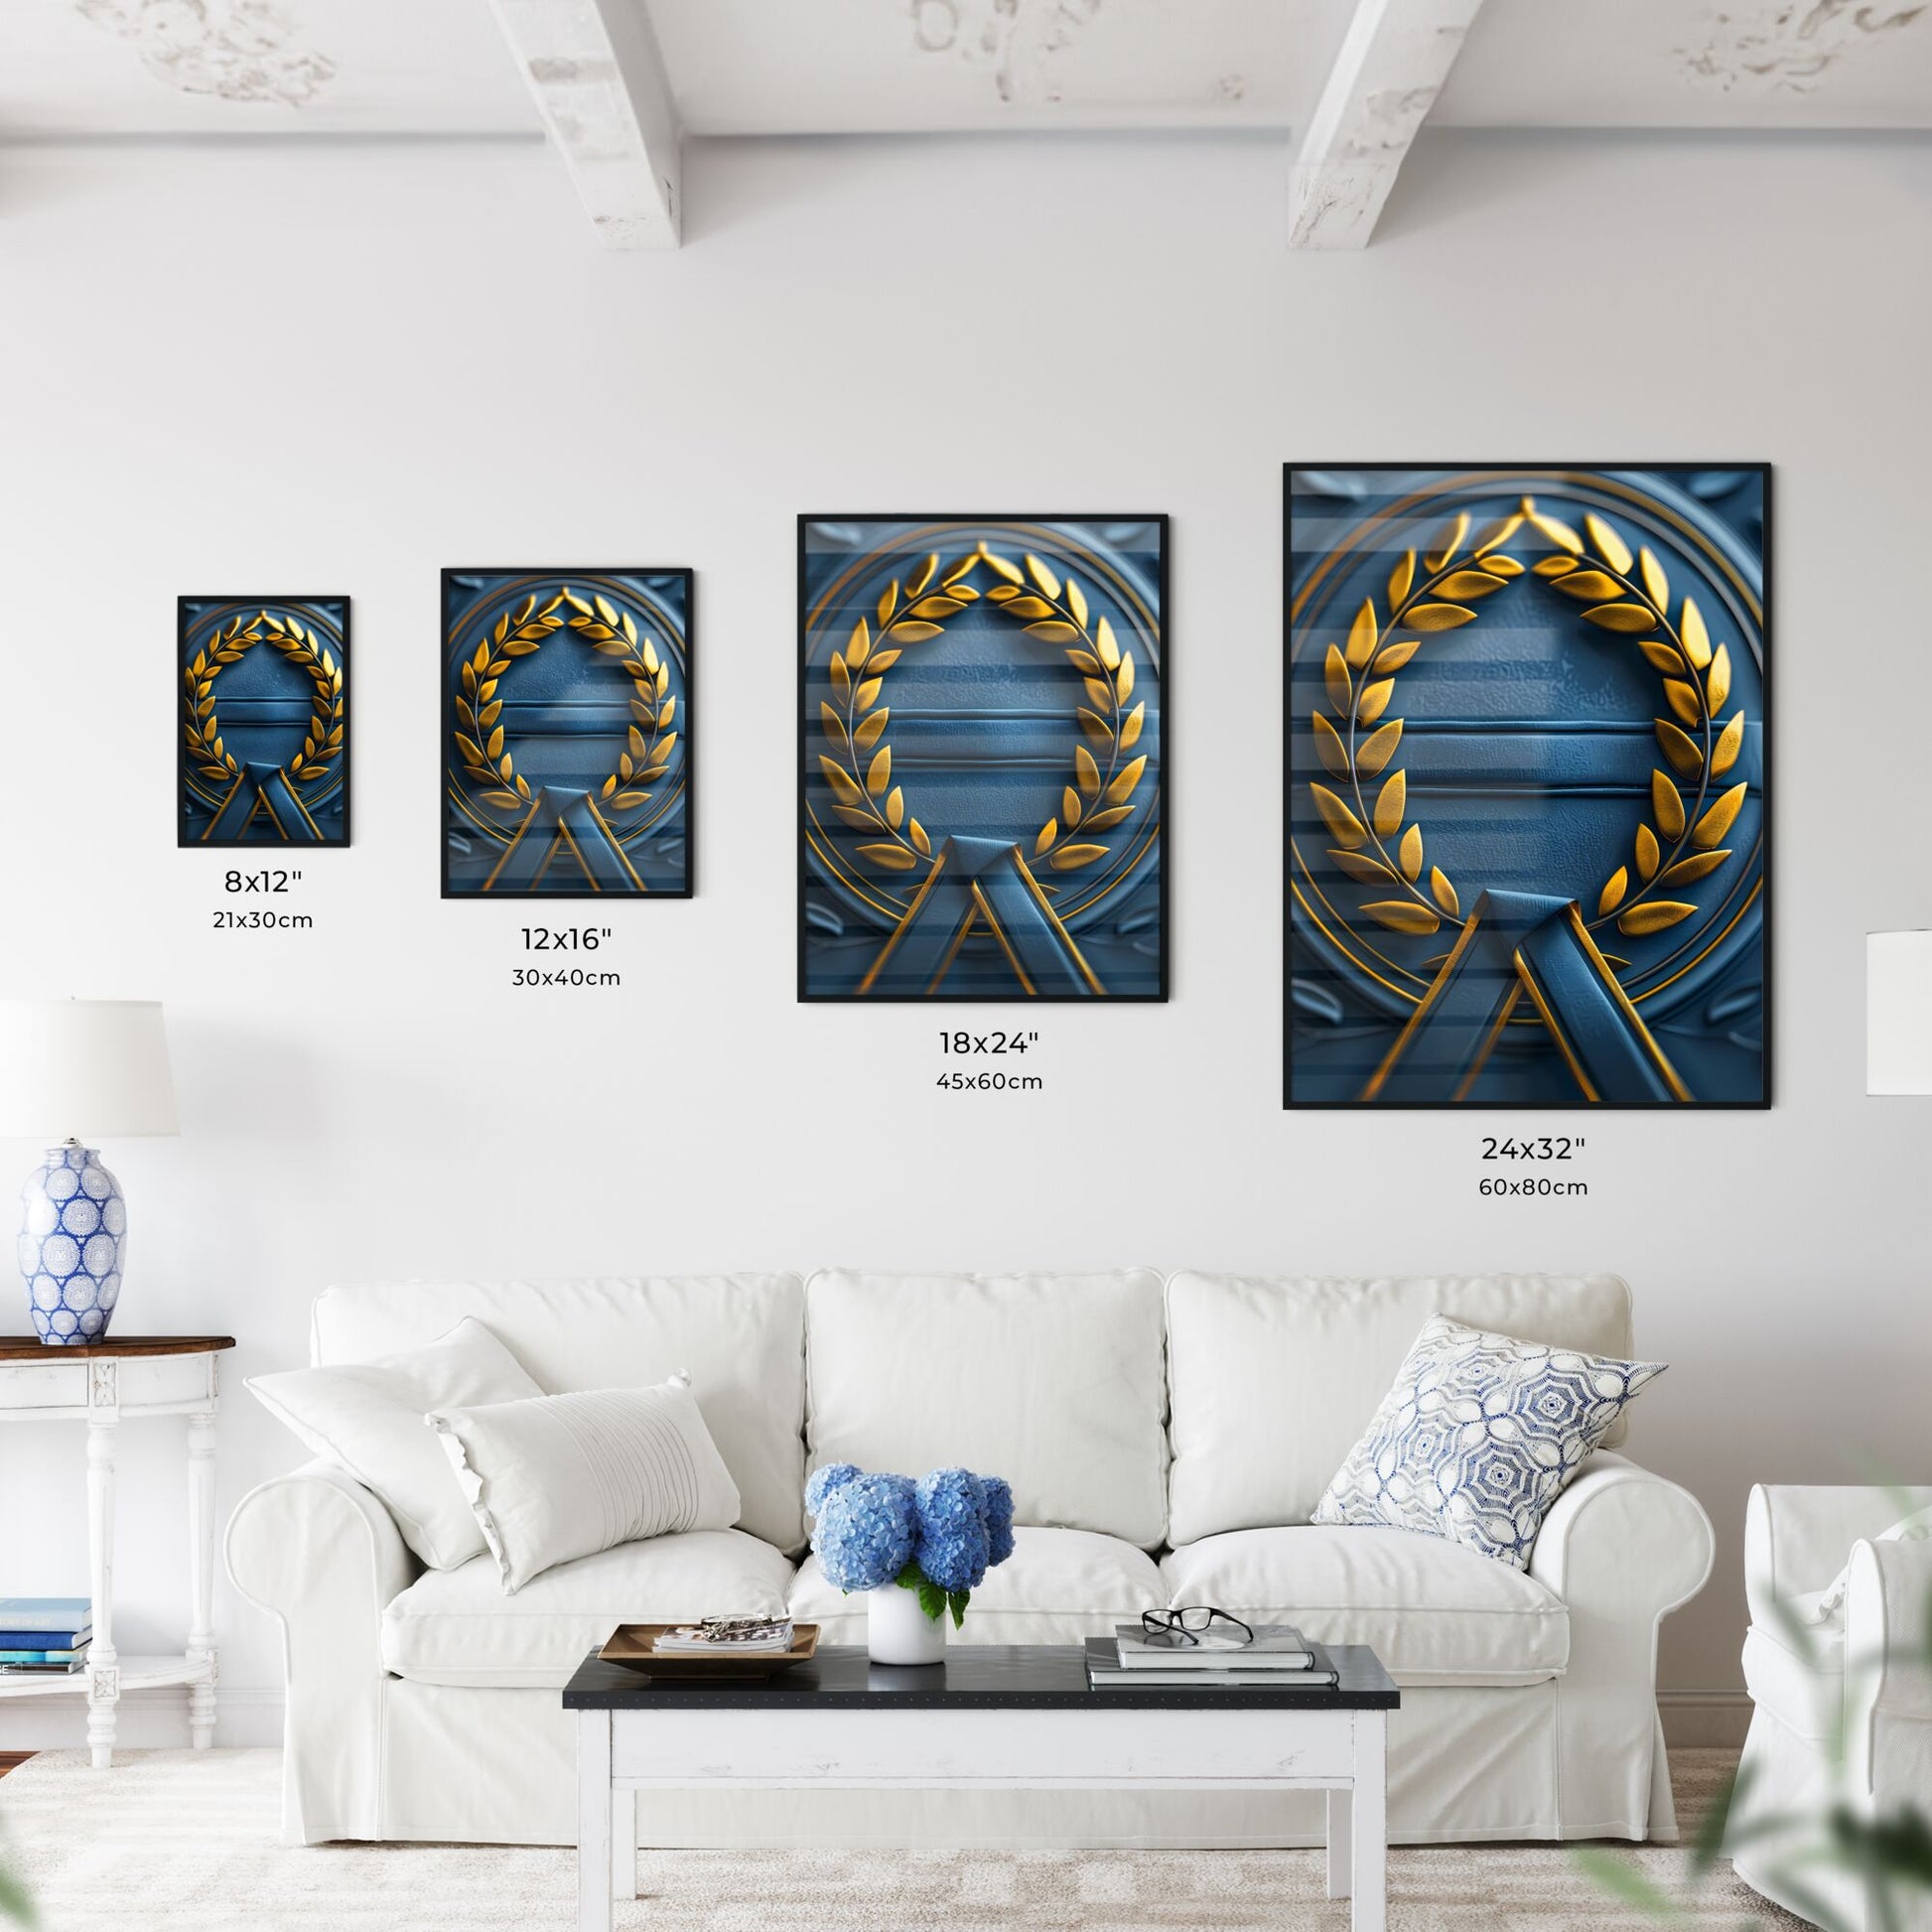 3D Laurel Wreath Icon, Blue and Gold, Excellence Ribbon, White Background, Transparent PNG, Painting Art Default Title